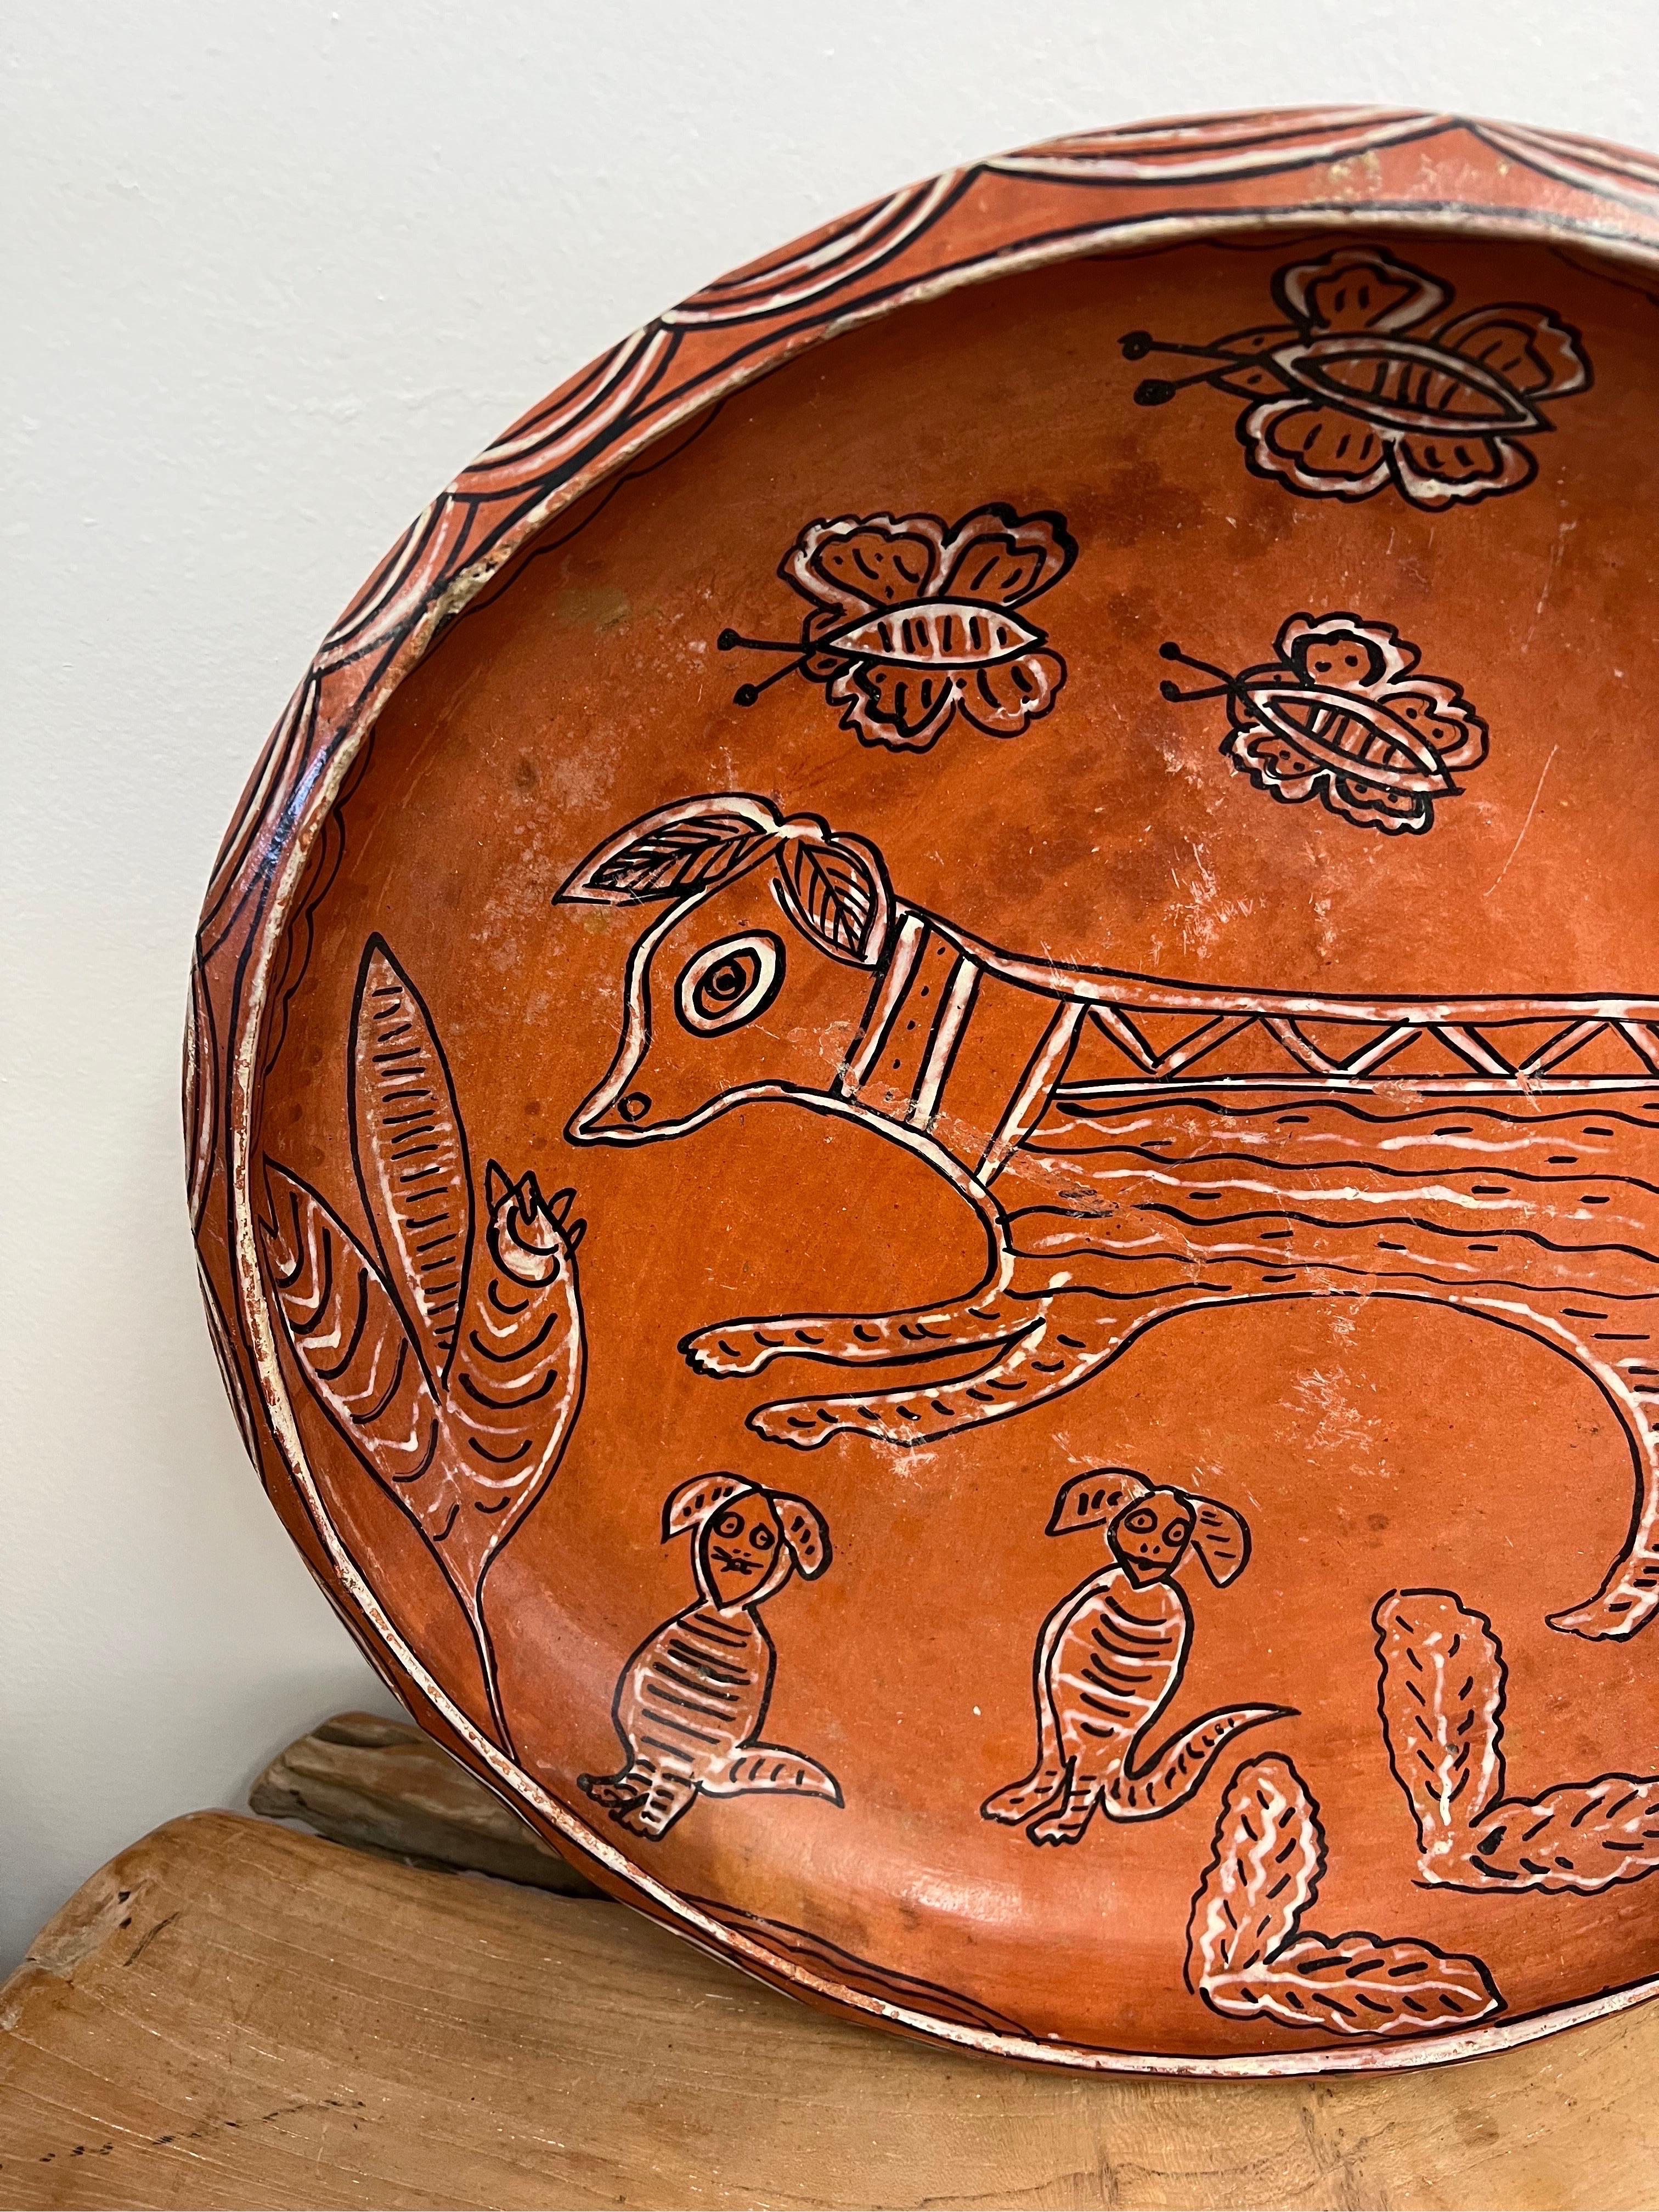 Vintage handmade pottery with hand painted animal motif in a terracotta orange color.

Dimensions. diameter 17 1/2 ; 2 3/4 depth.